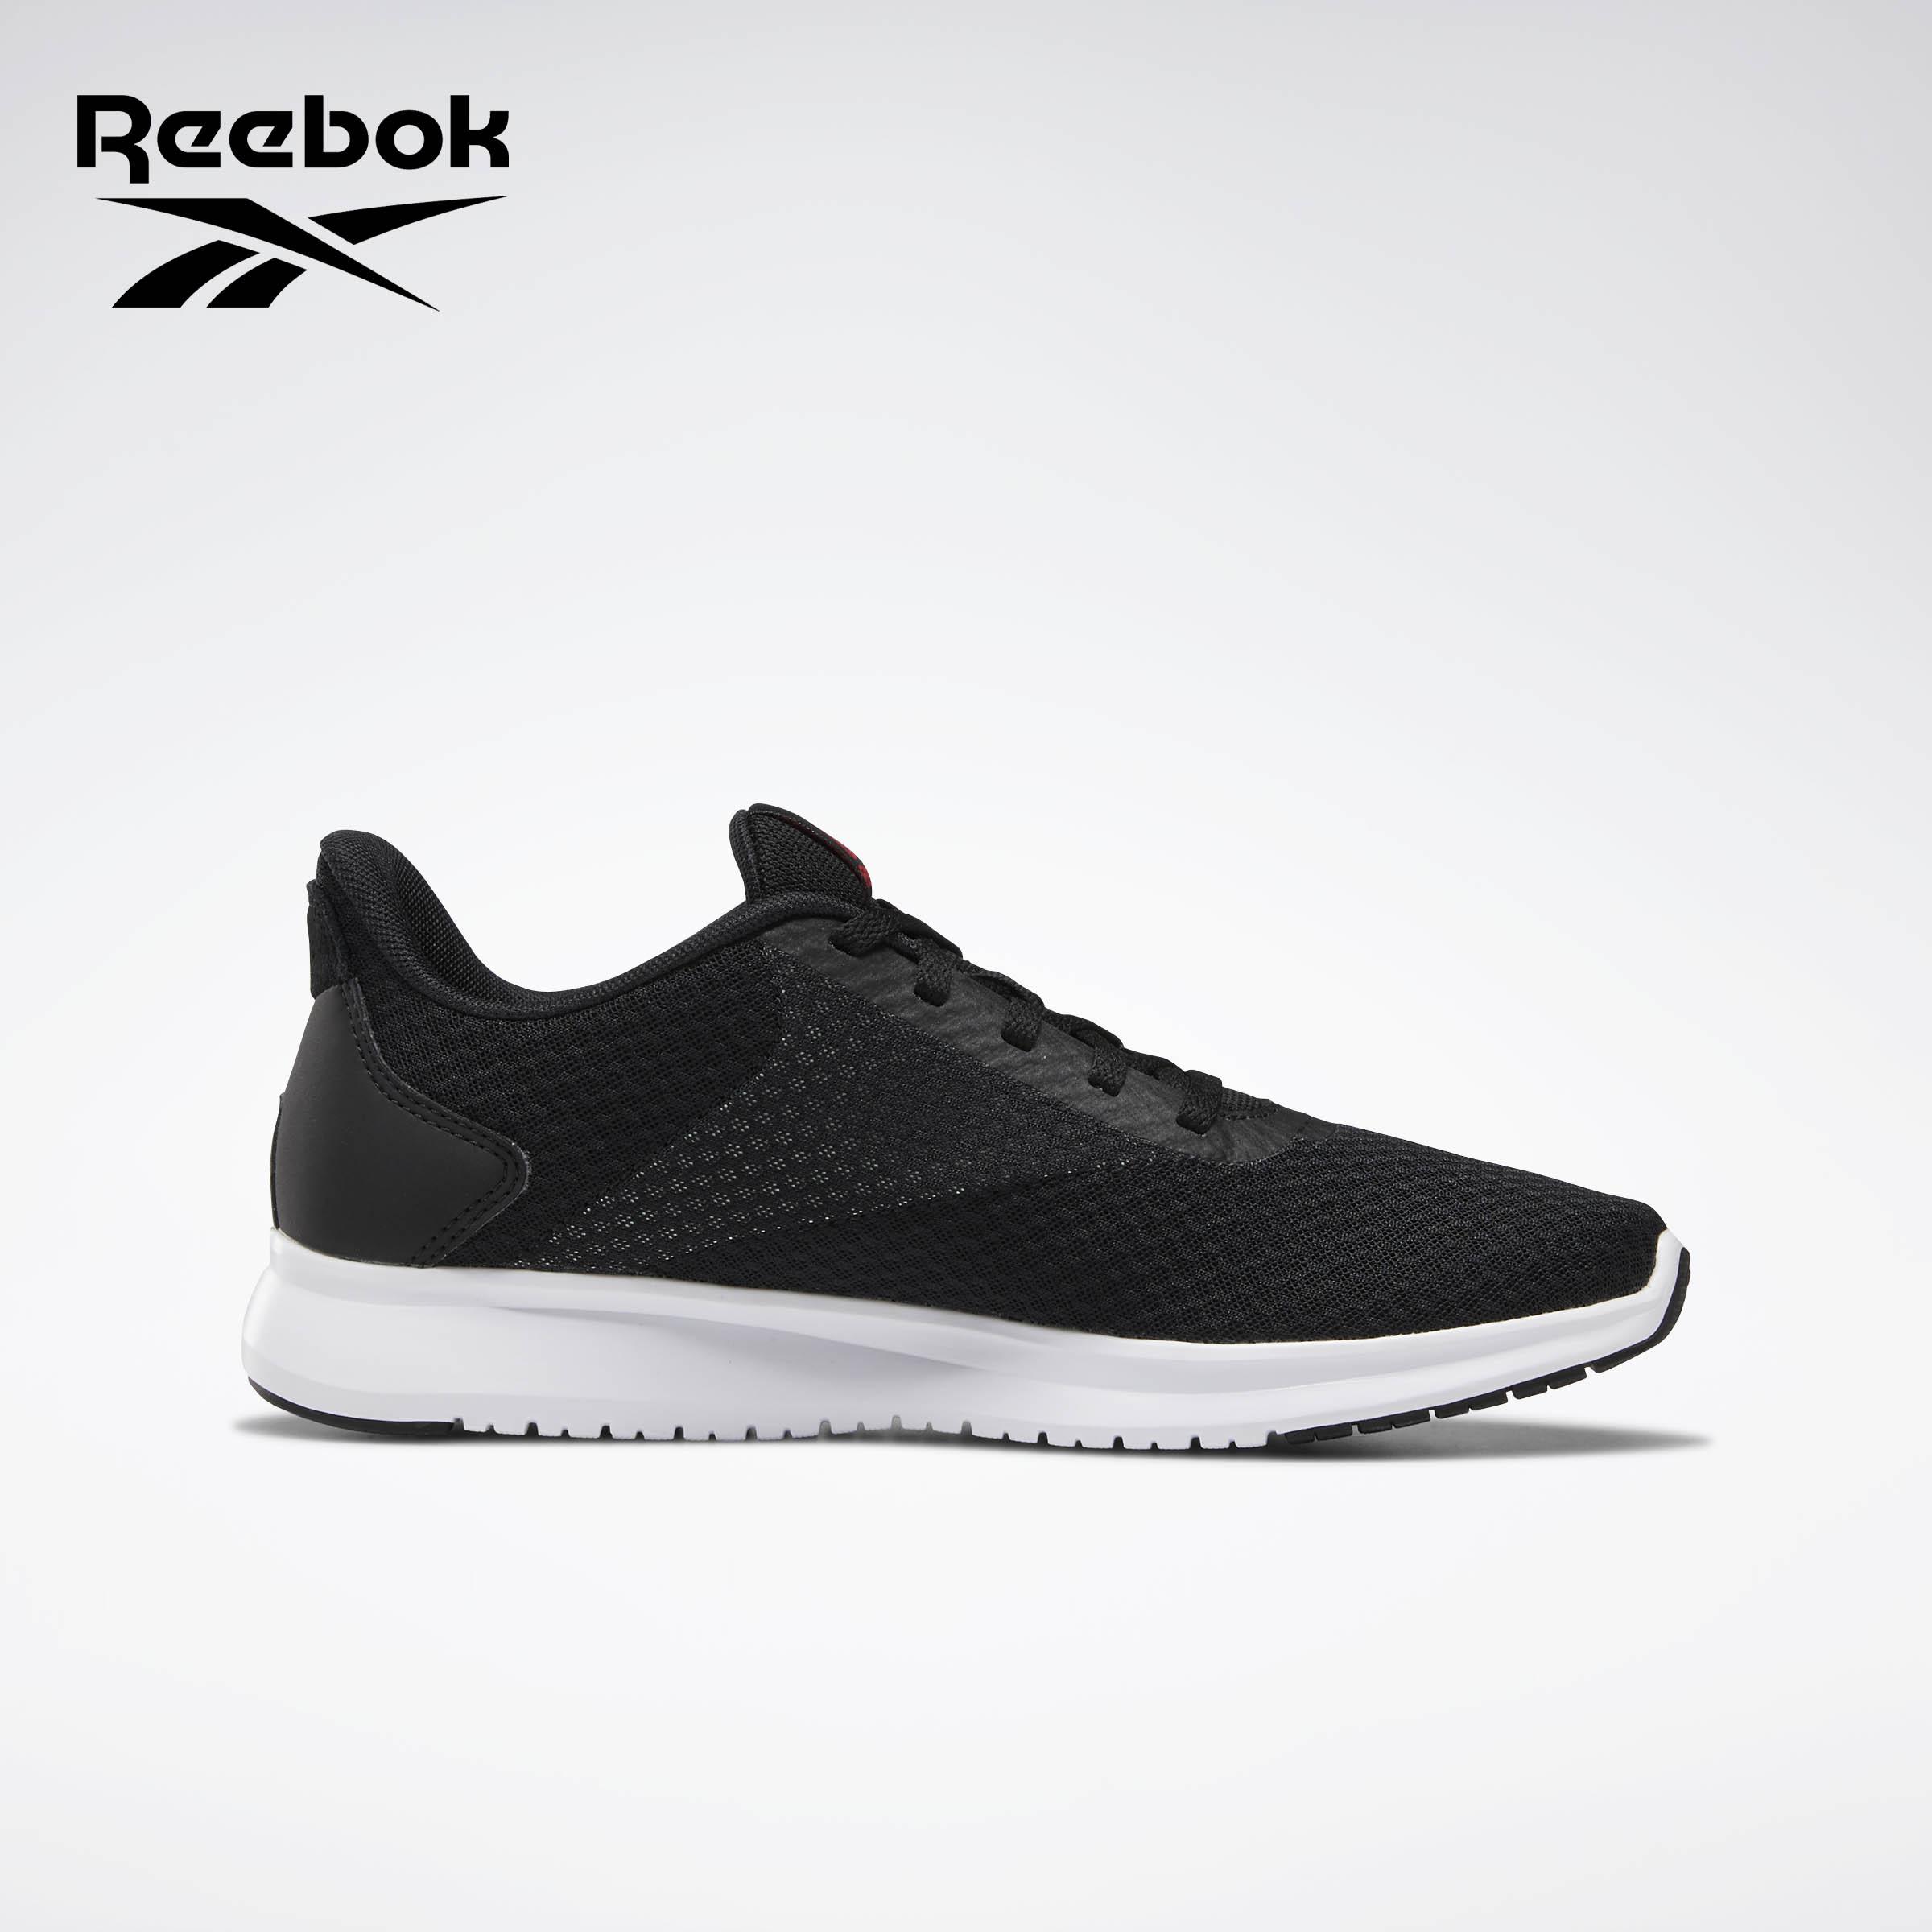 reebok shoes price and photo